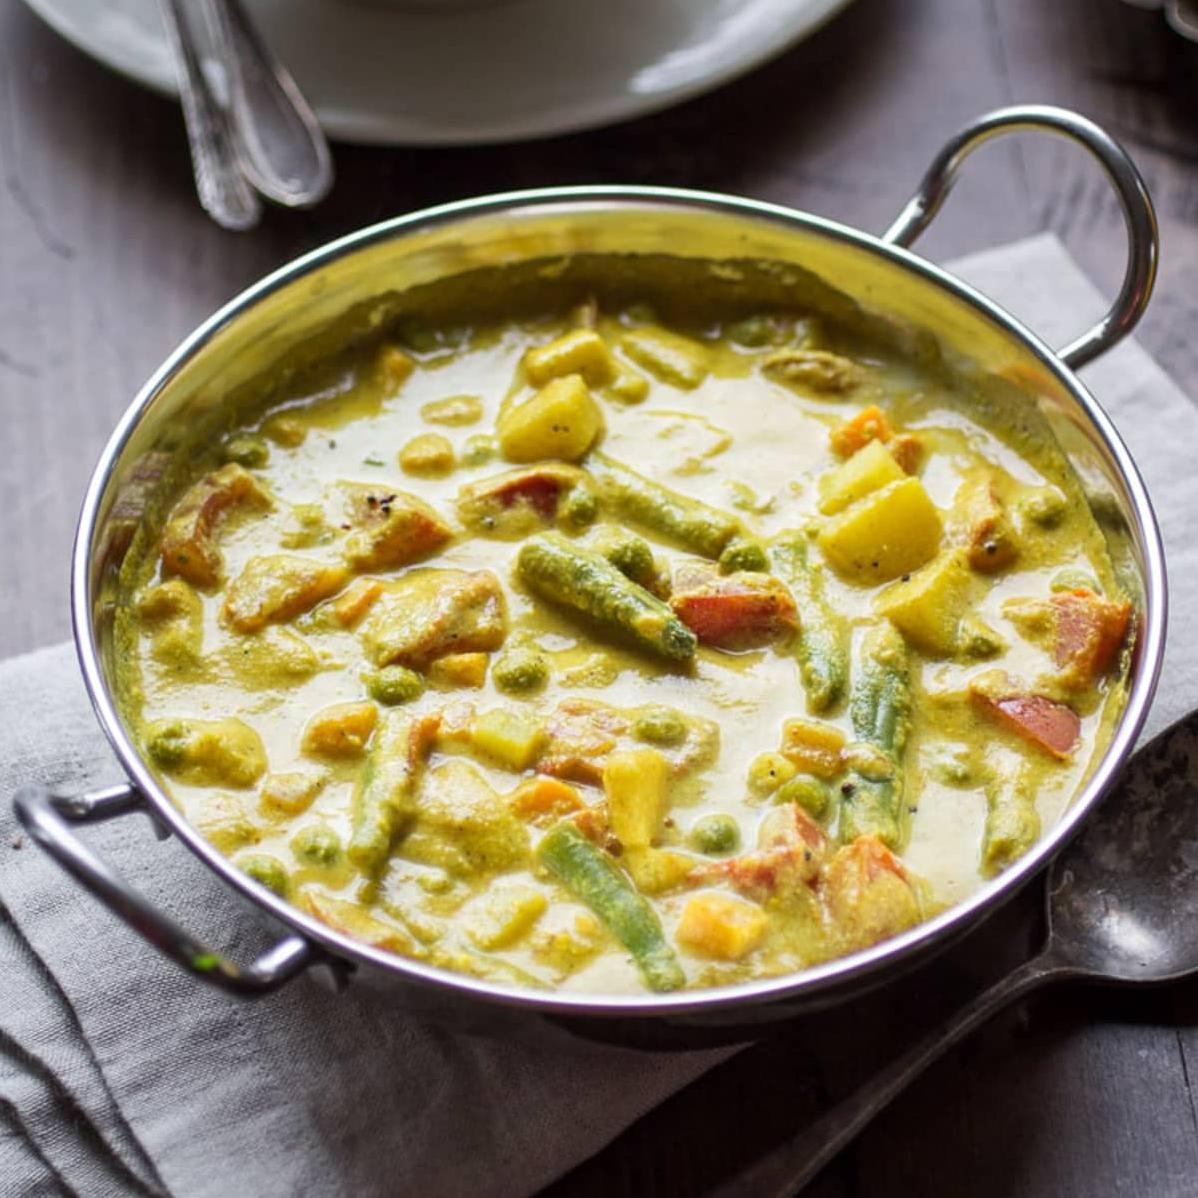  Perfect for a cozy night in, this vegetarian korma is comfort food at its finest.